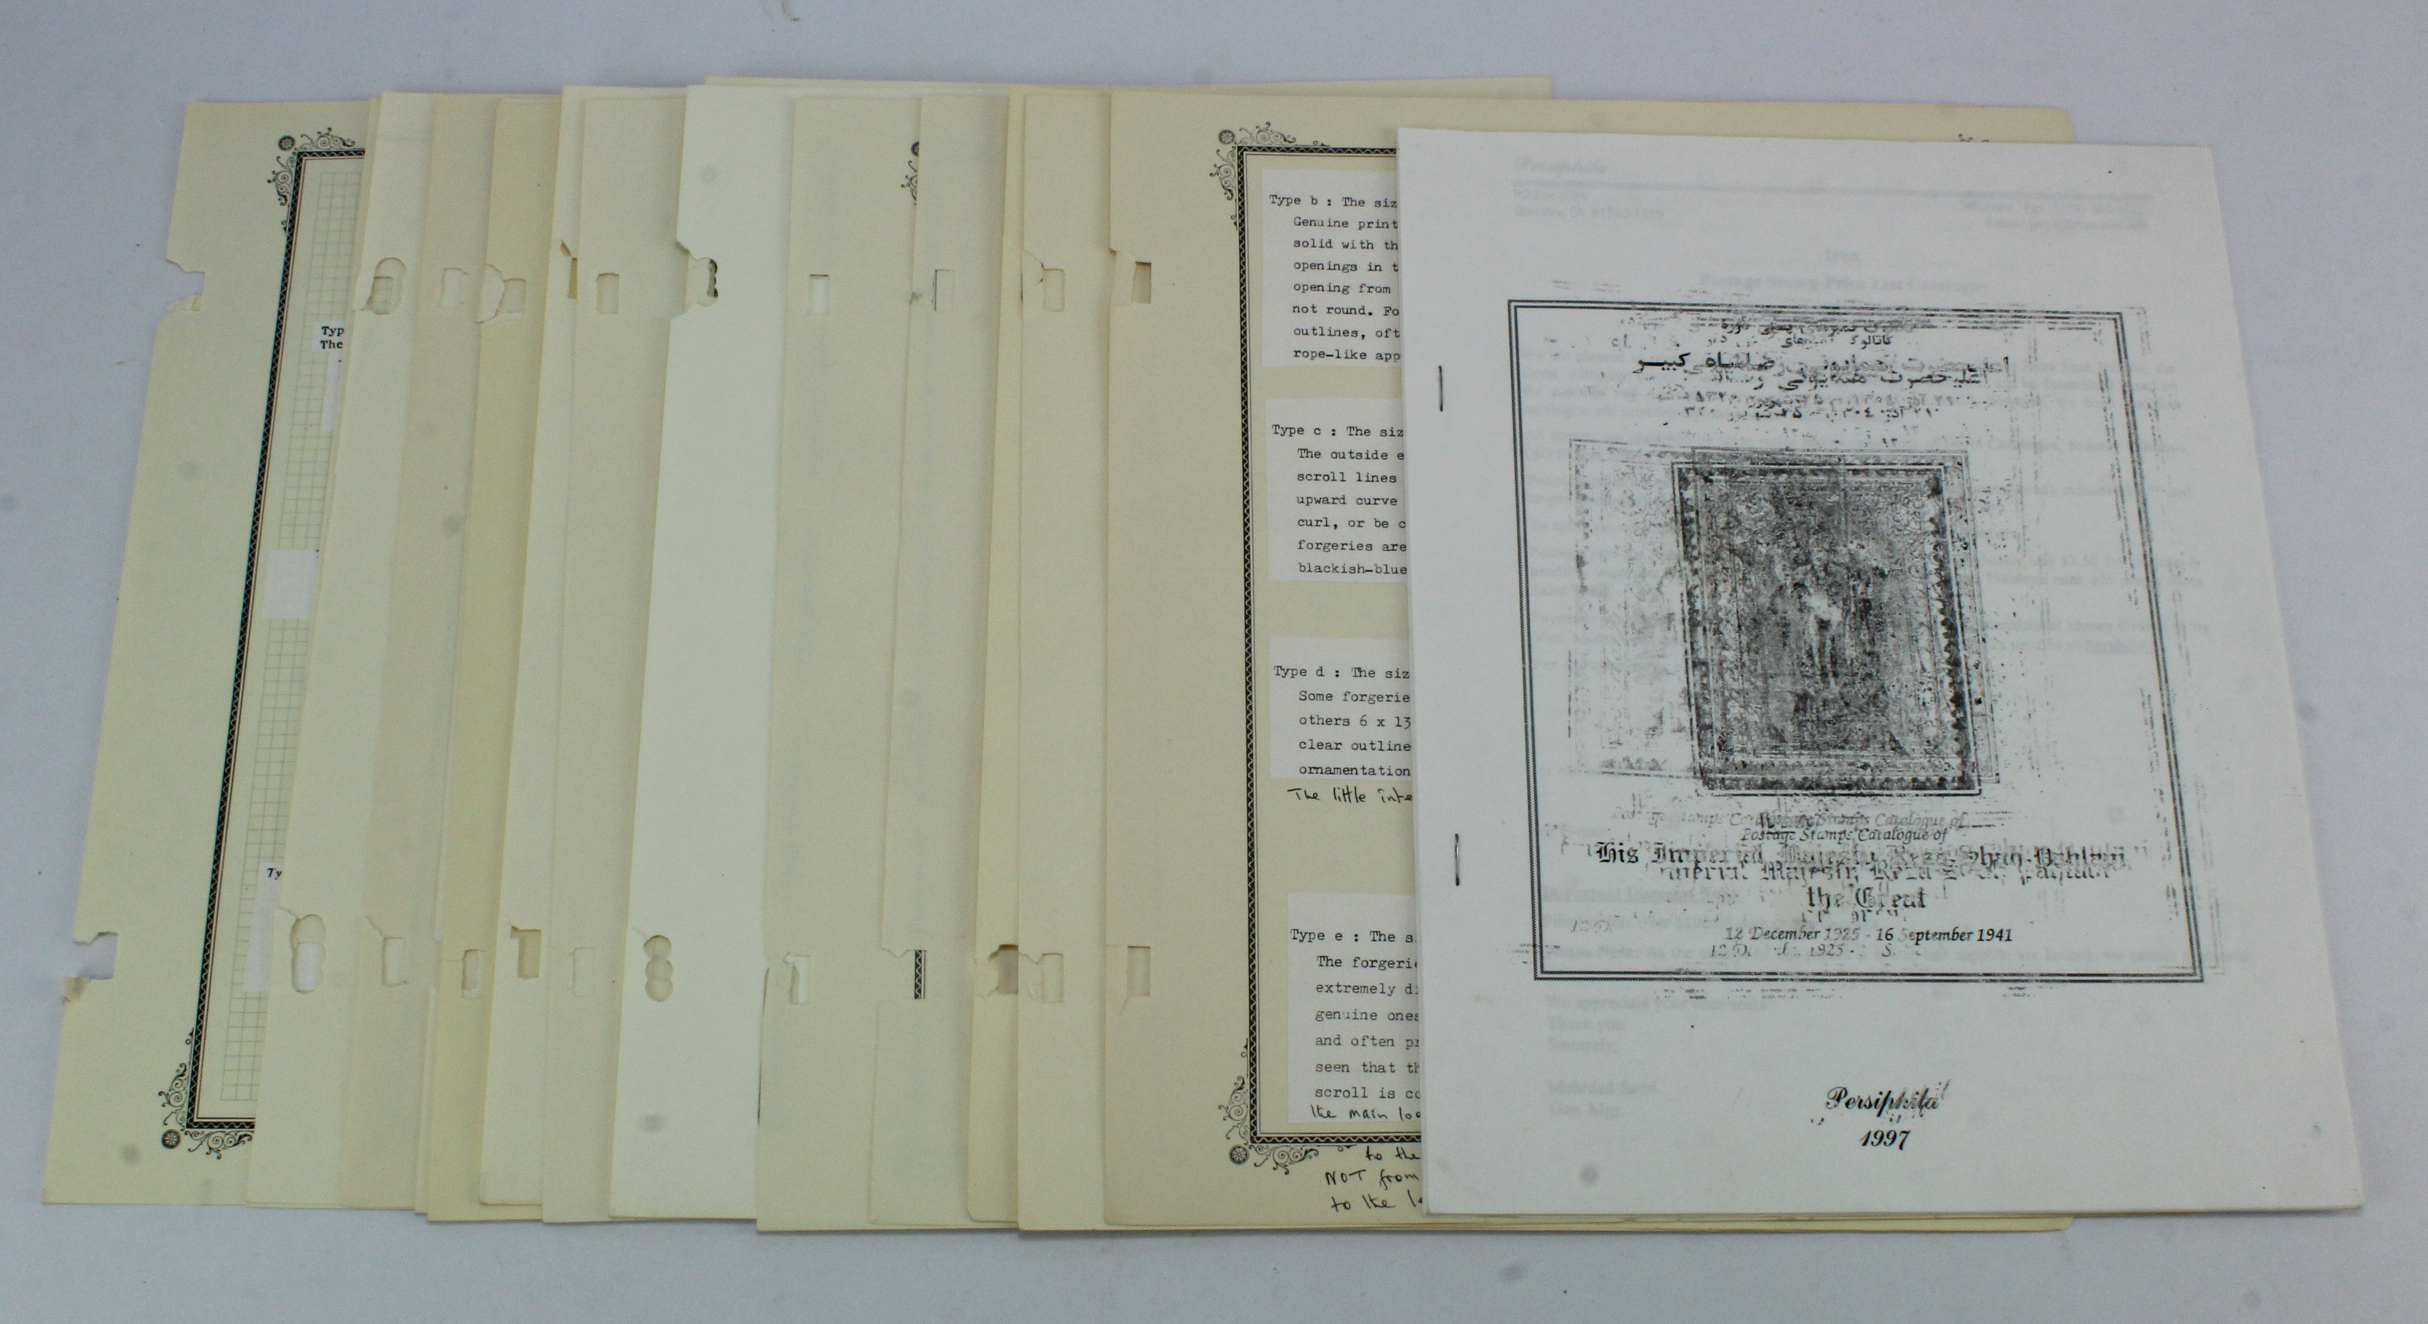 Persia - range of early material written up on album pages, overprint varieties, forgeries, 2x items